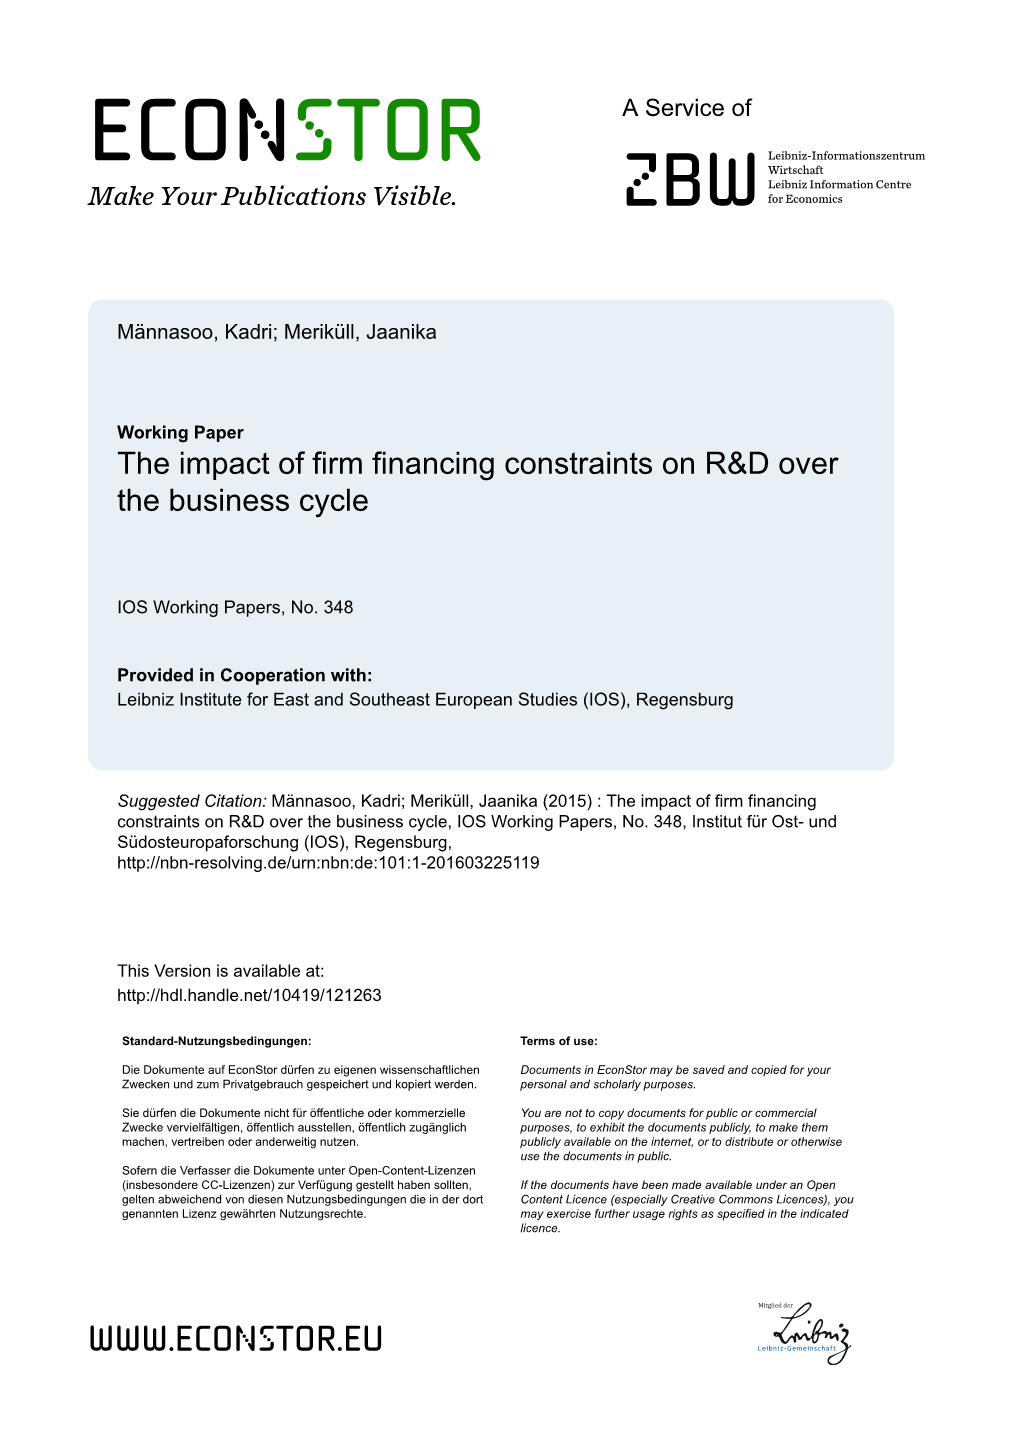 The Impact of Firm Financing Constraints on R&D Over